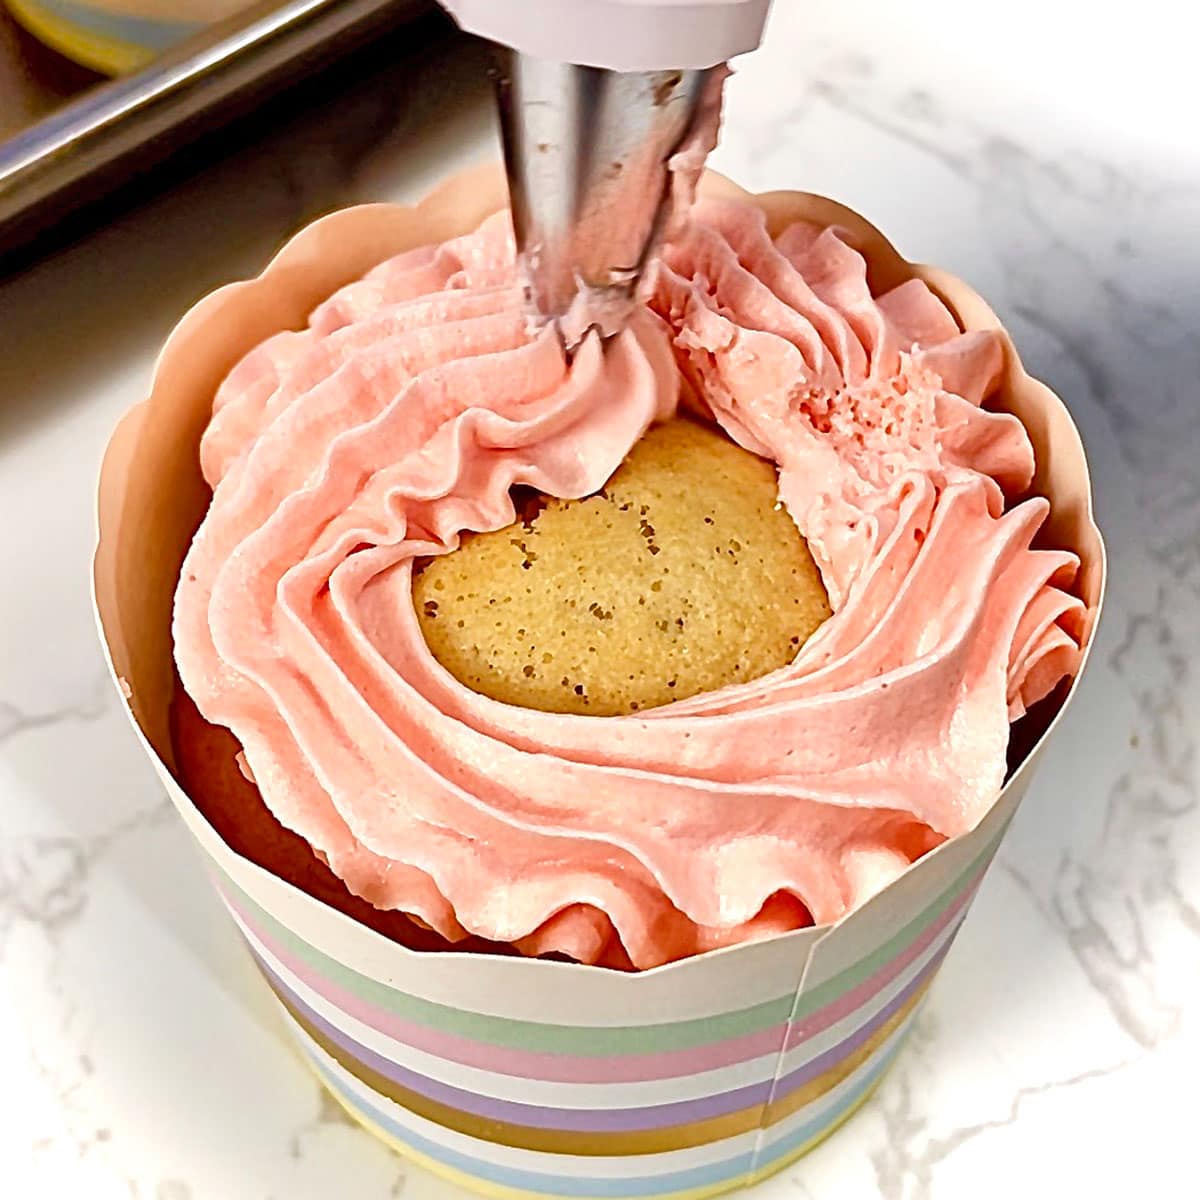 Applying frosting on cupcake.